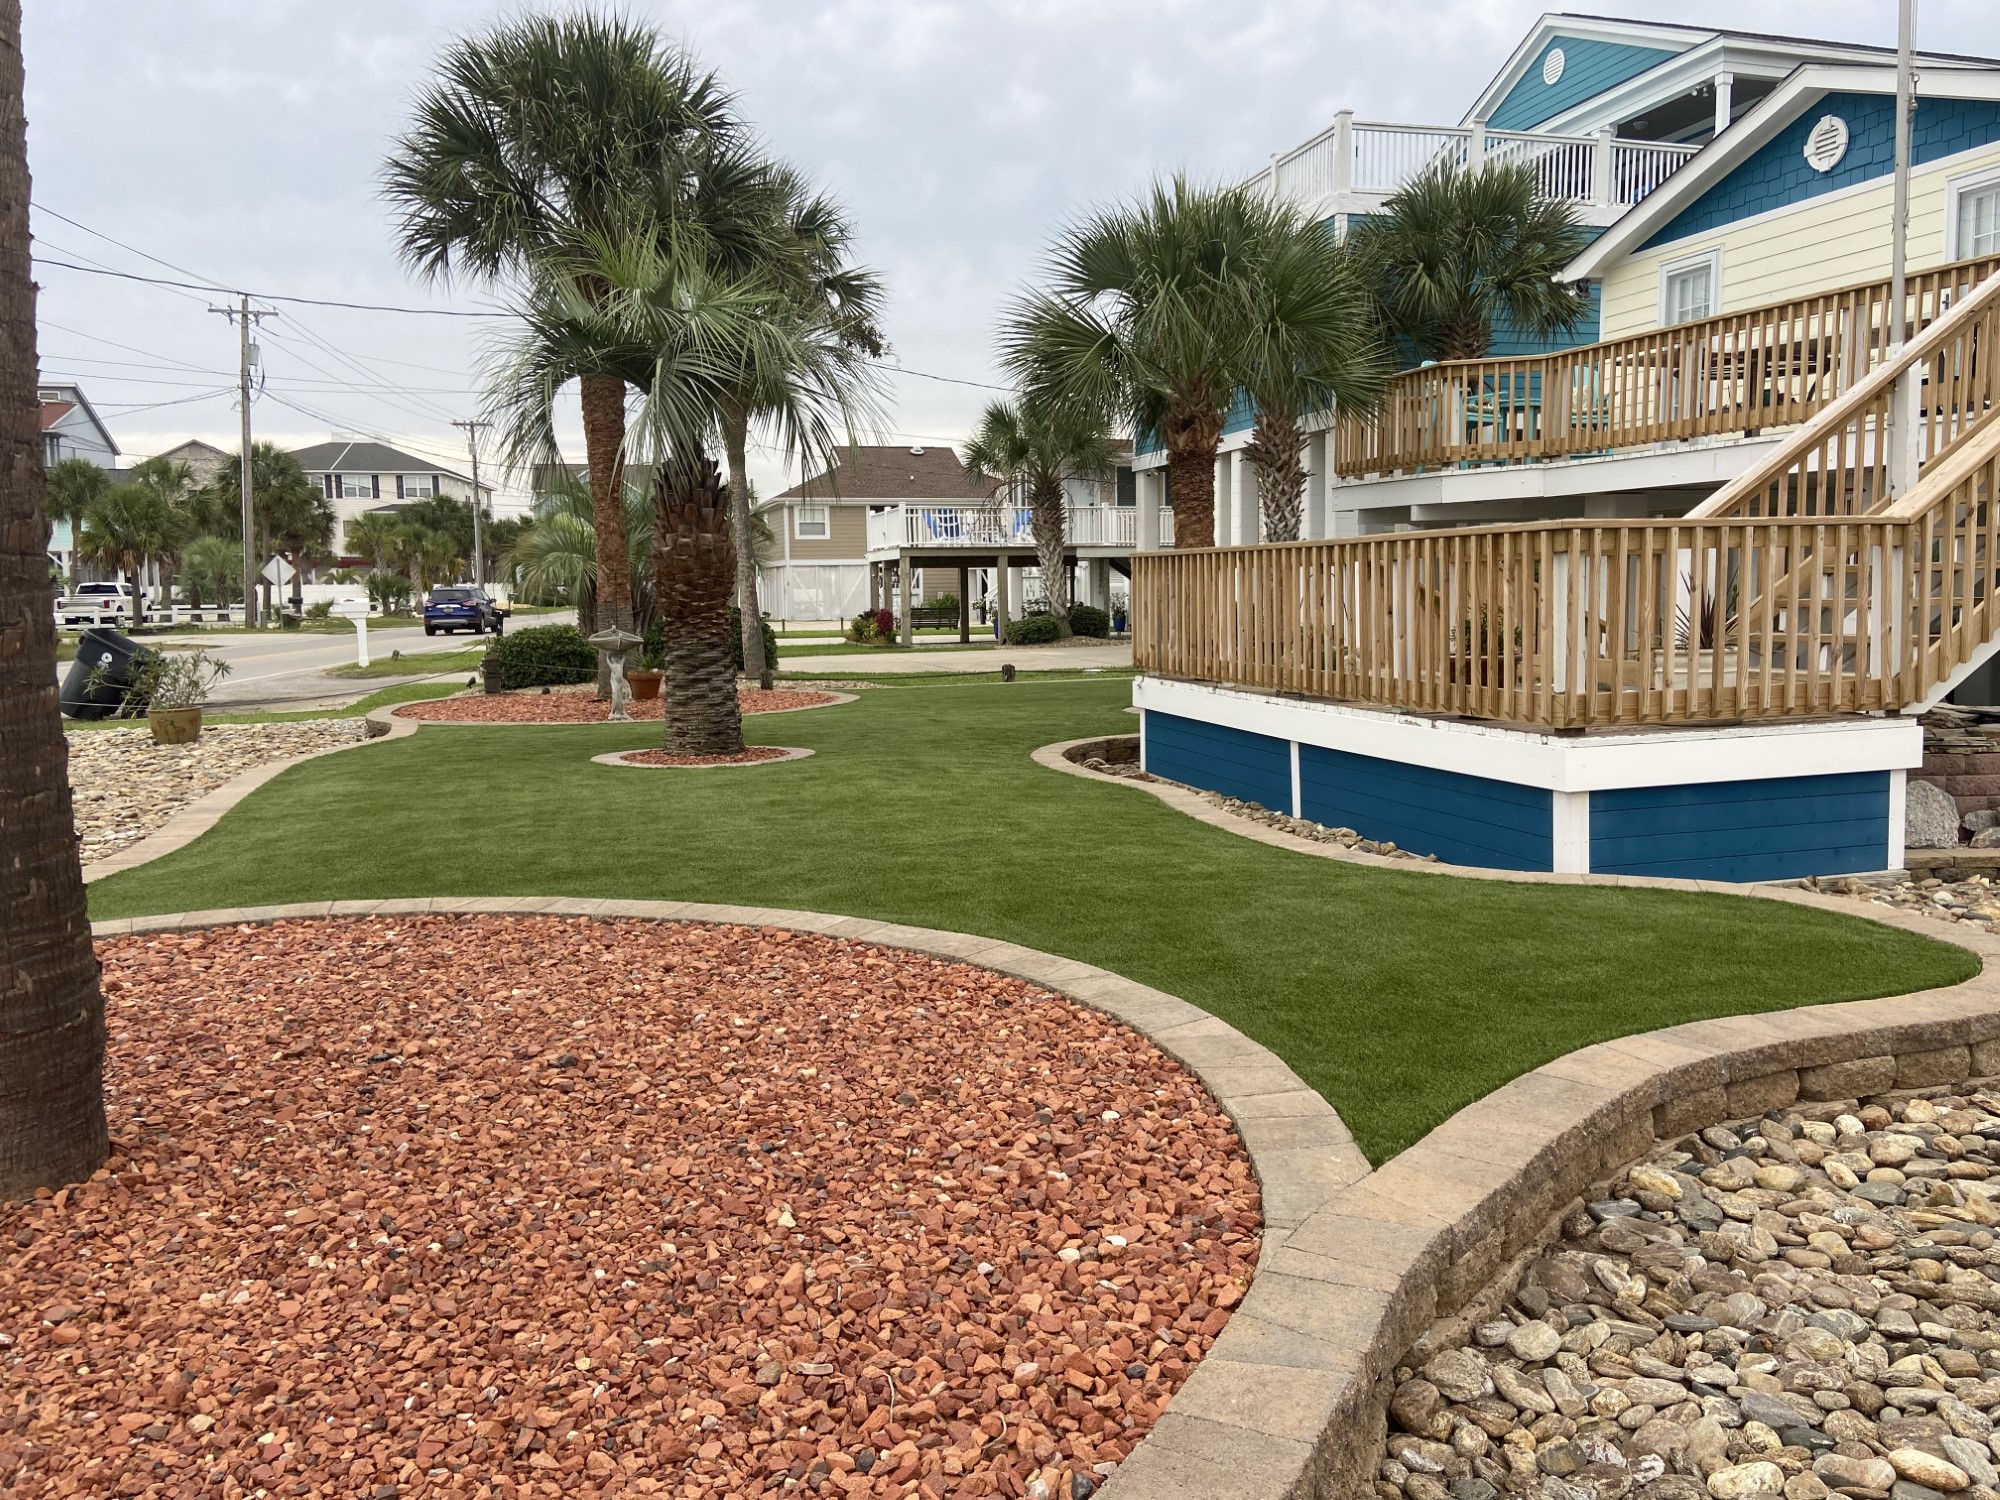 Artificial grass front yard area with blue house